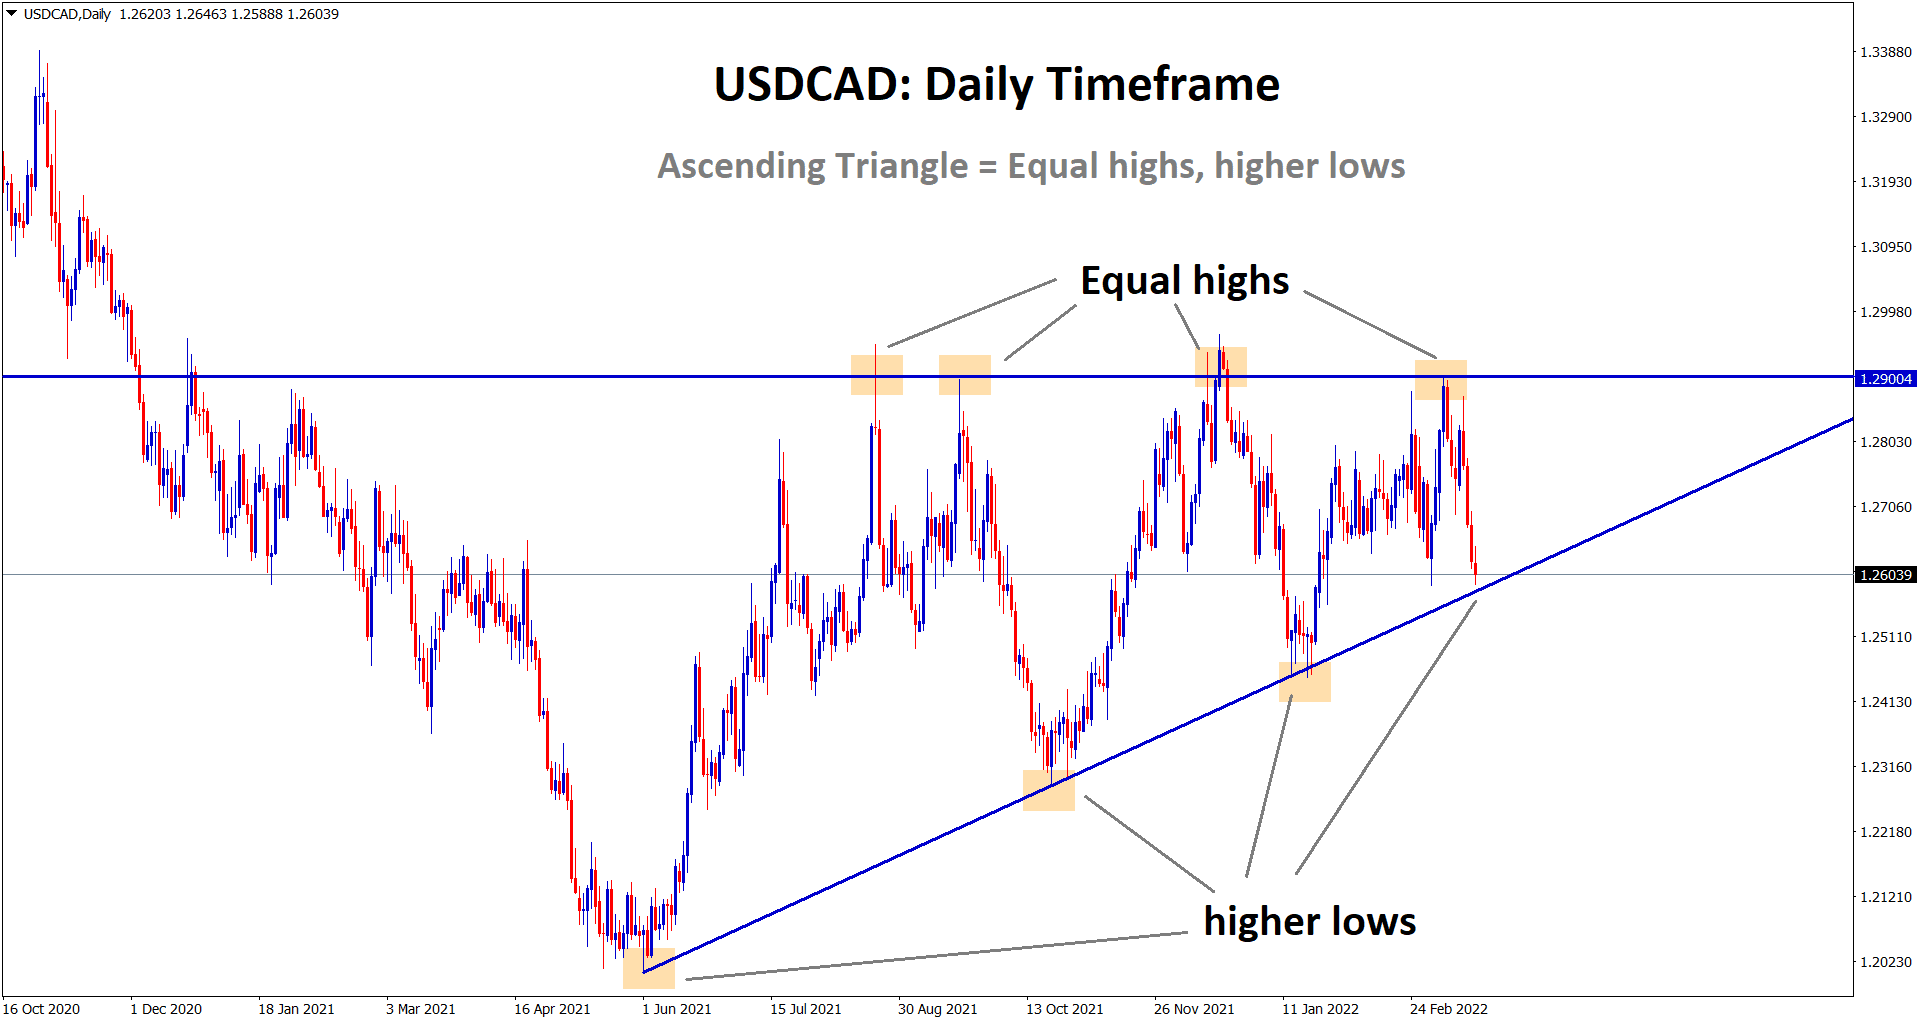 USDCAD price is standing now at the higher low area of the Ascending Triangle